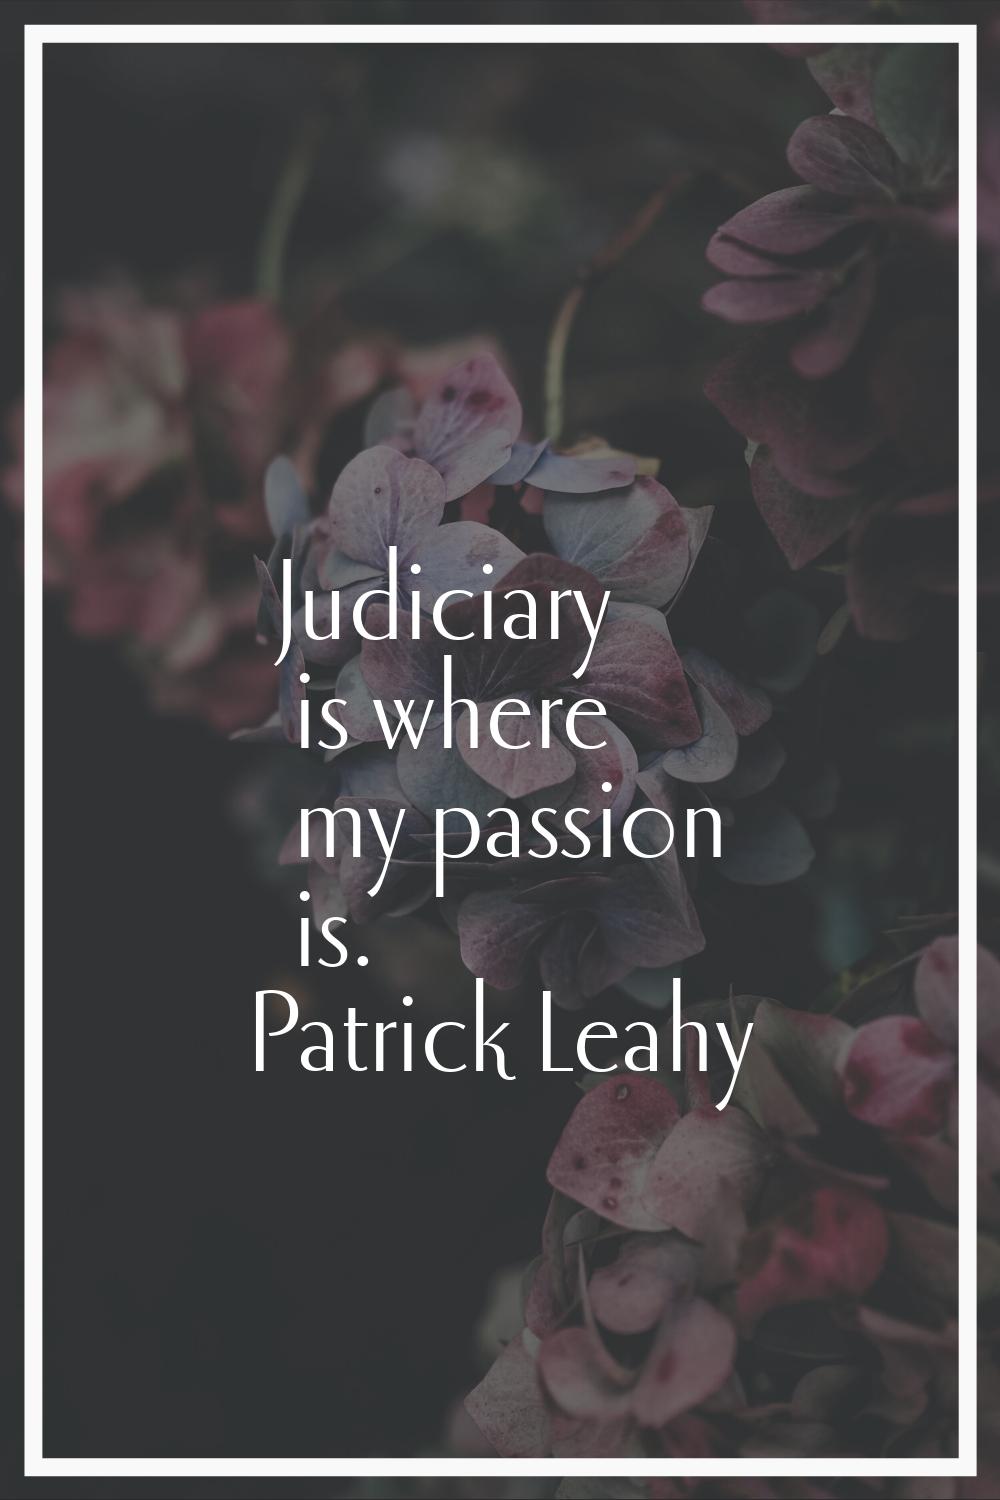 Judiciary is where my passion is.